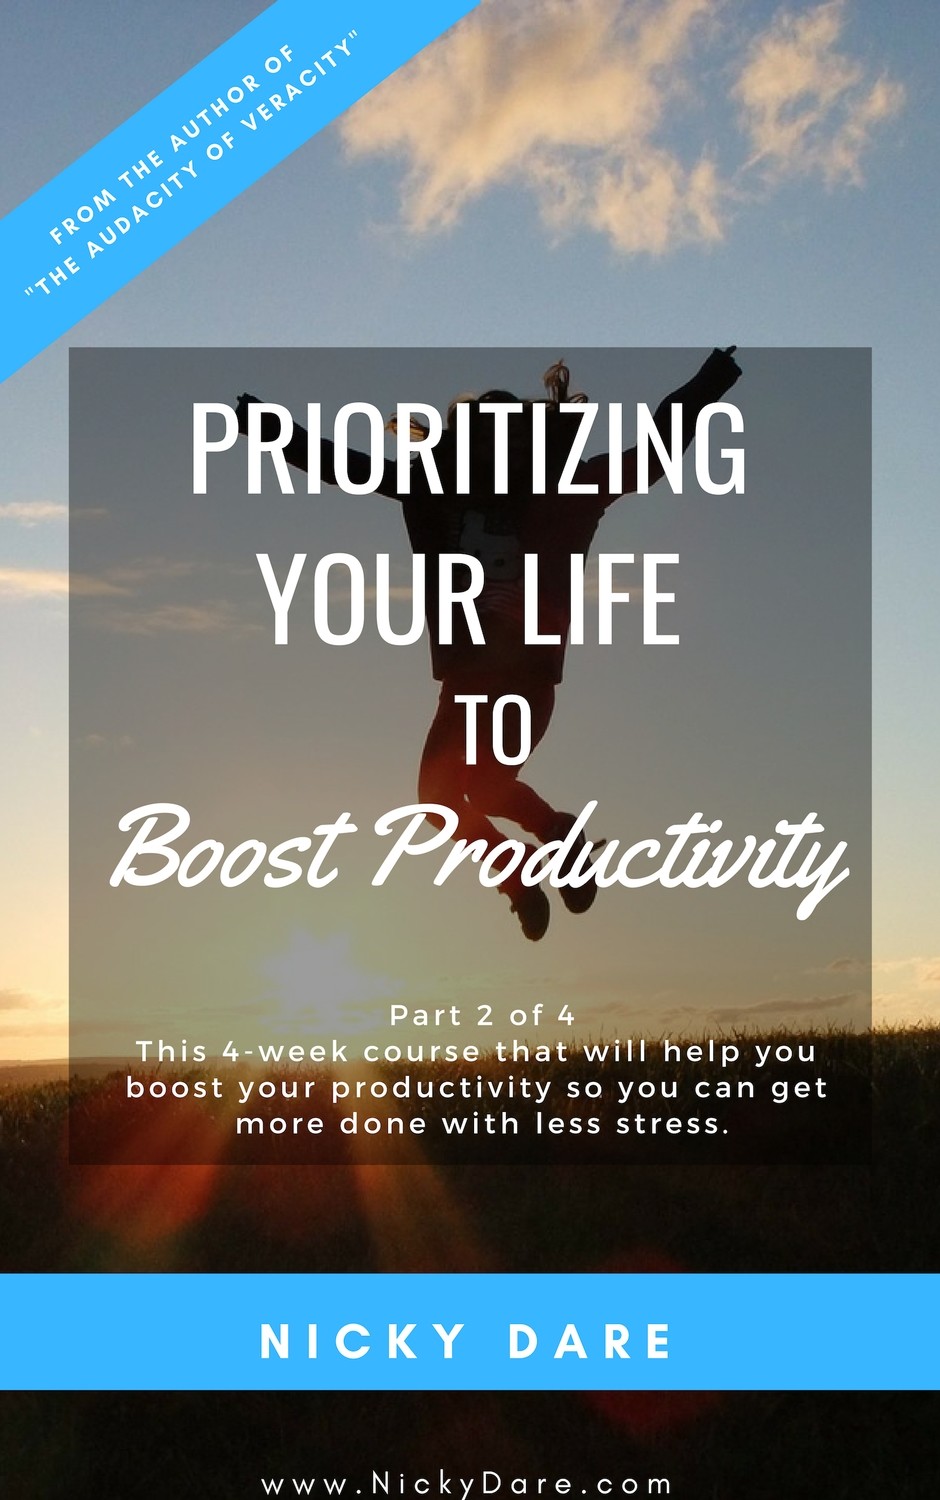 Part 2 of 4 | Prioritizing Your Life